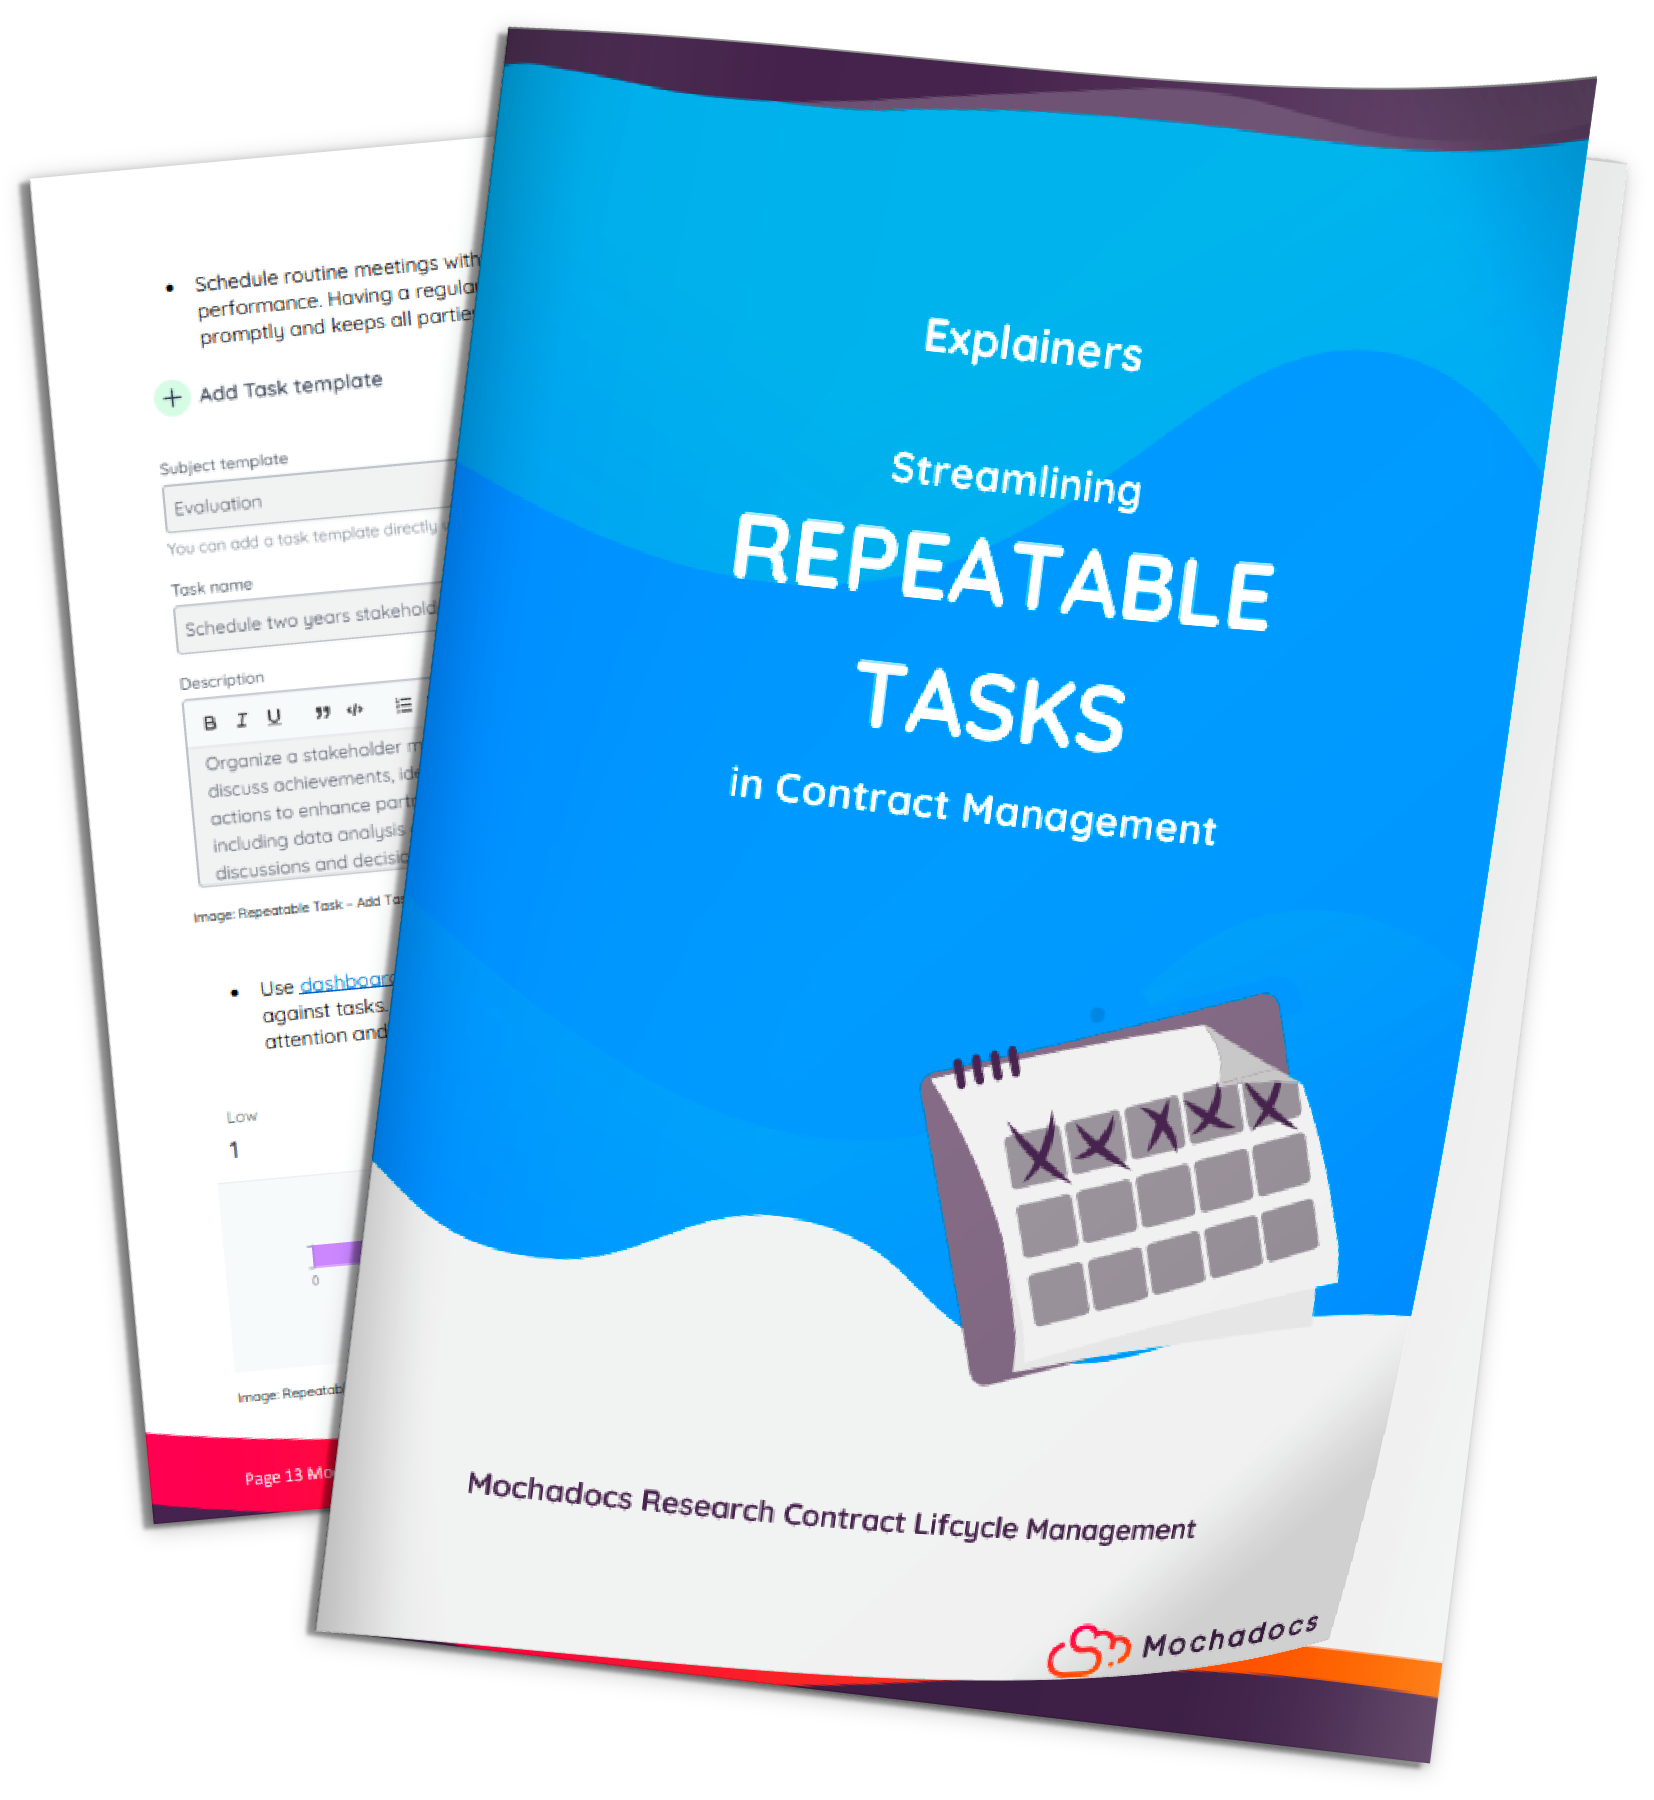 Streamlining Repeatable Tasks in Contract Management | Mochadocs